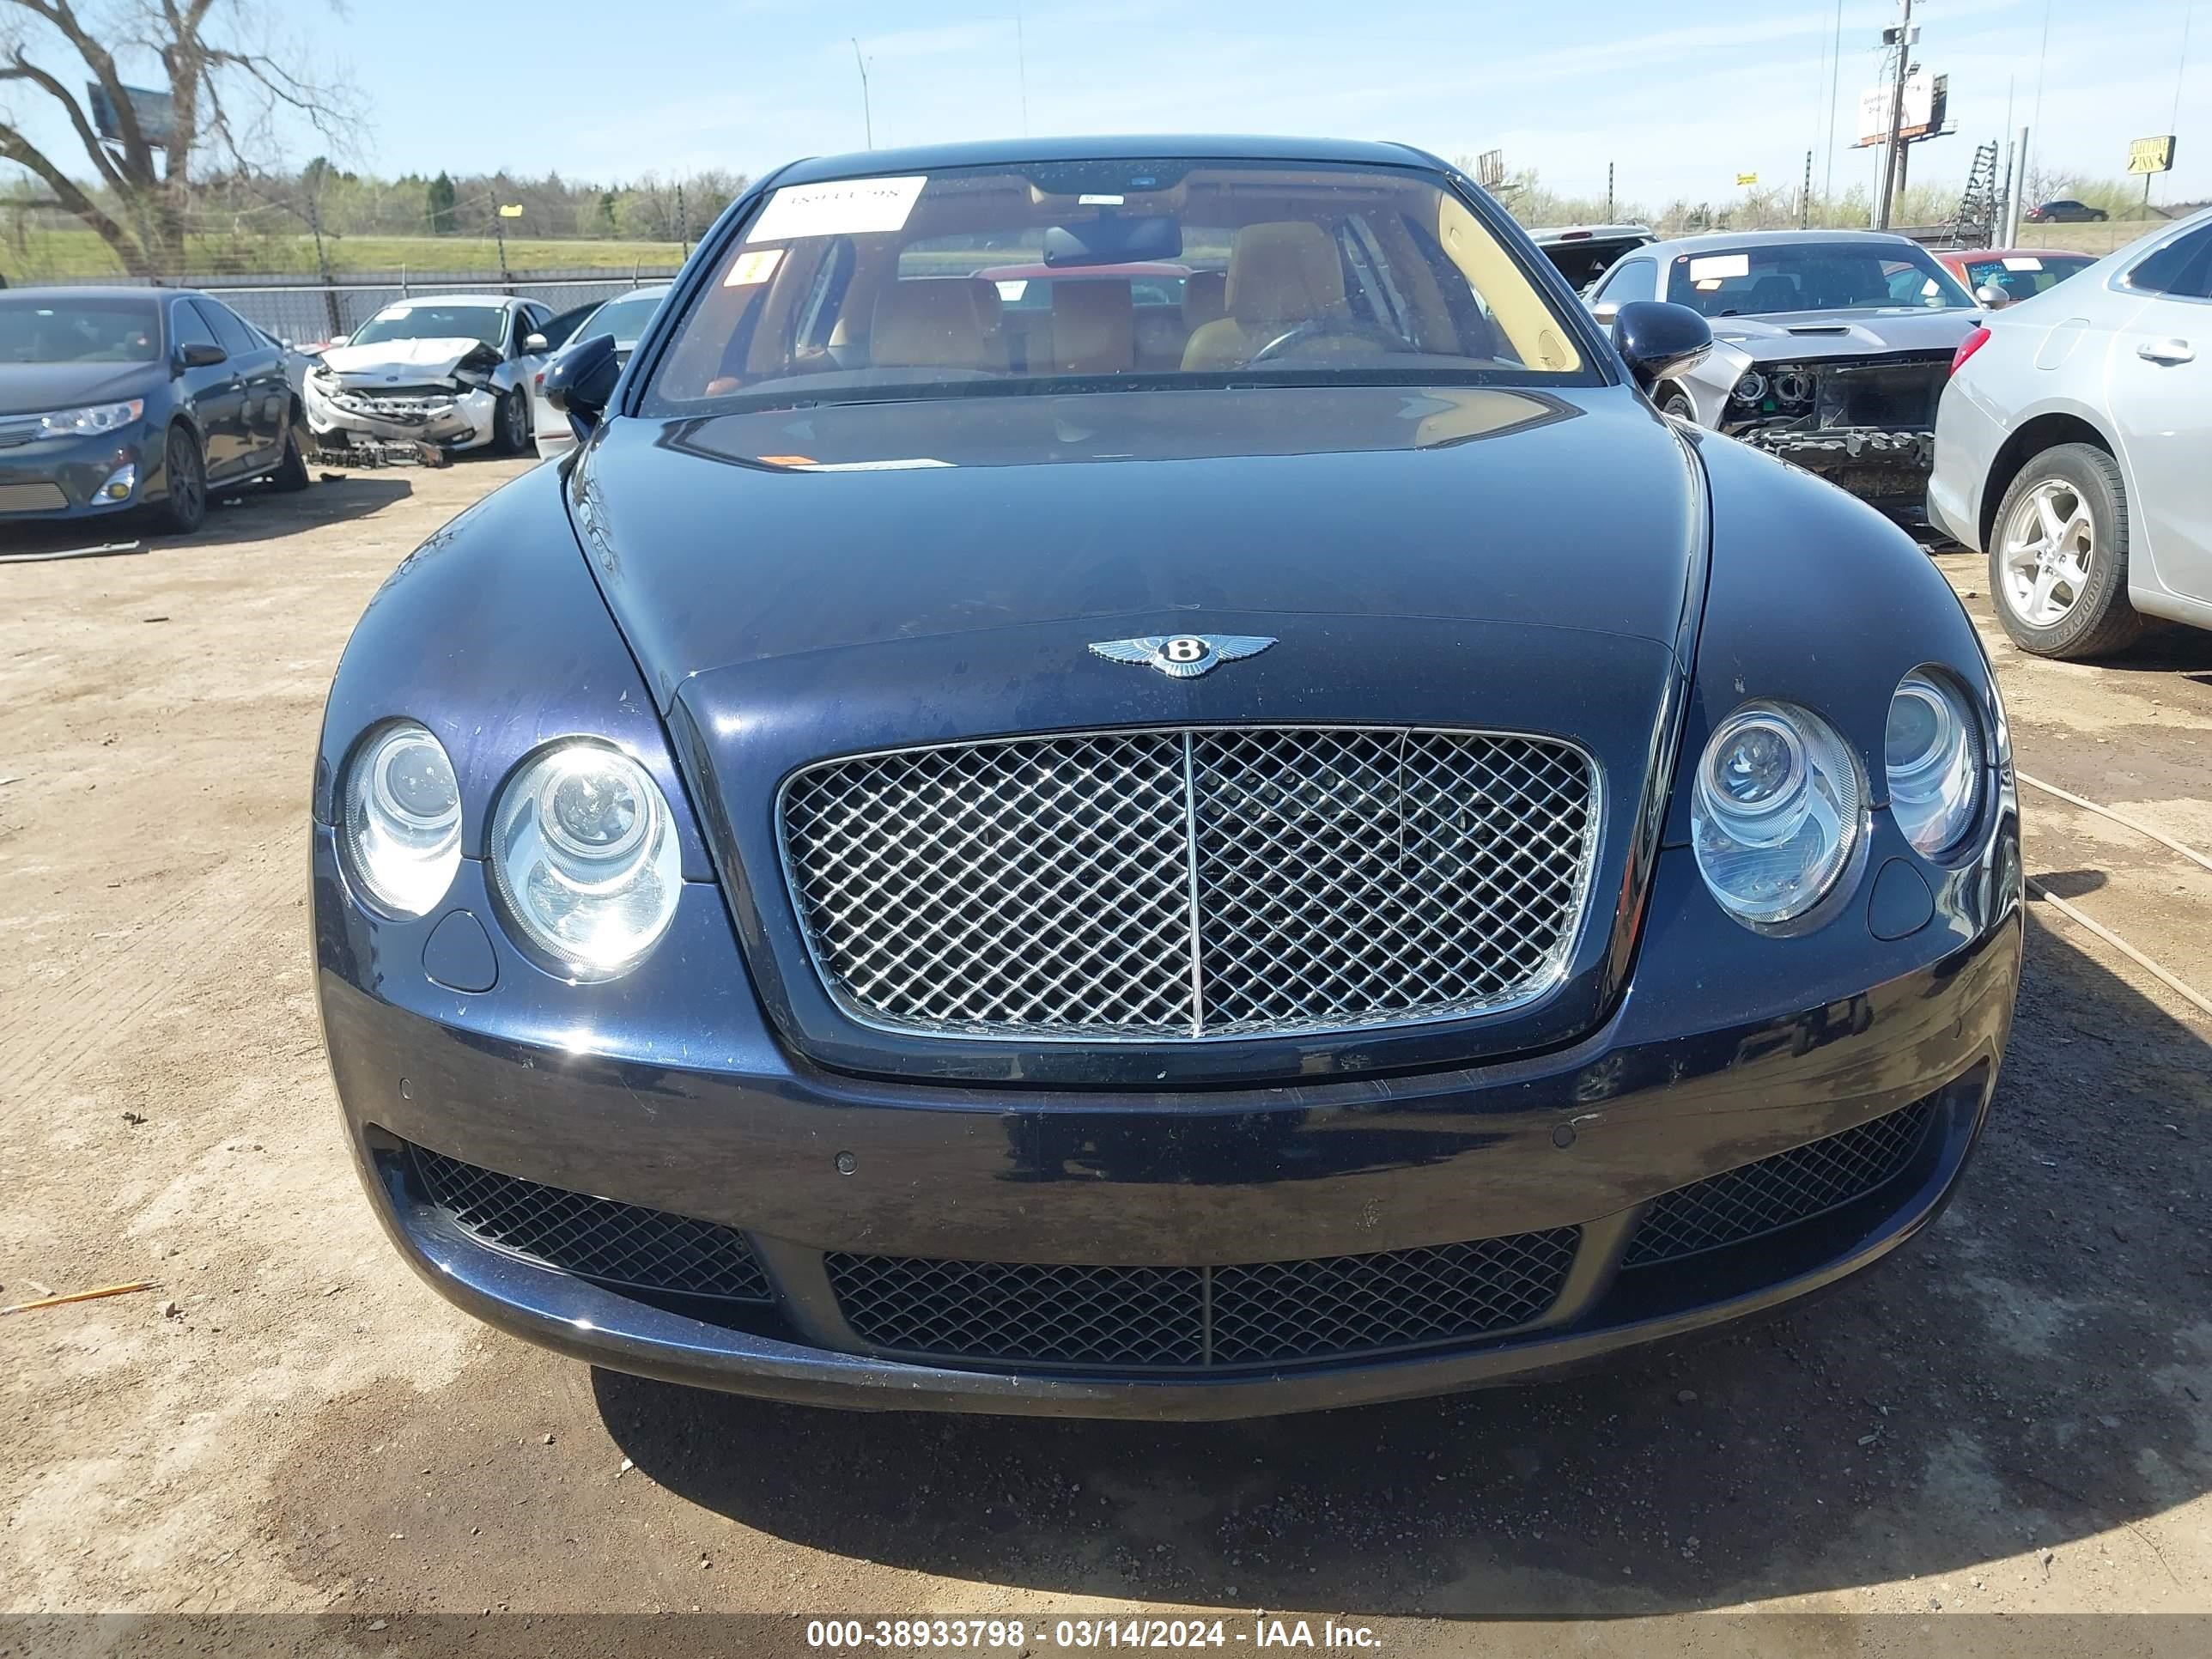 Photo 11 VIN: SCBBR53W46C034805 - BENTLEY CONTINENTAL FLYING SPUR 